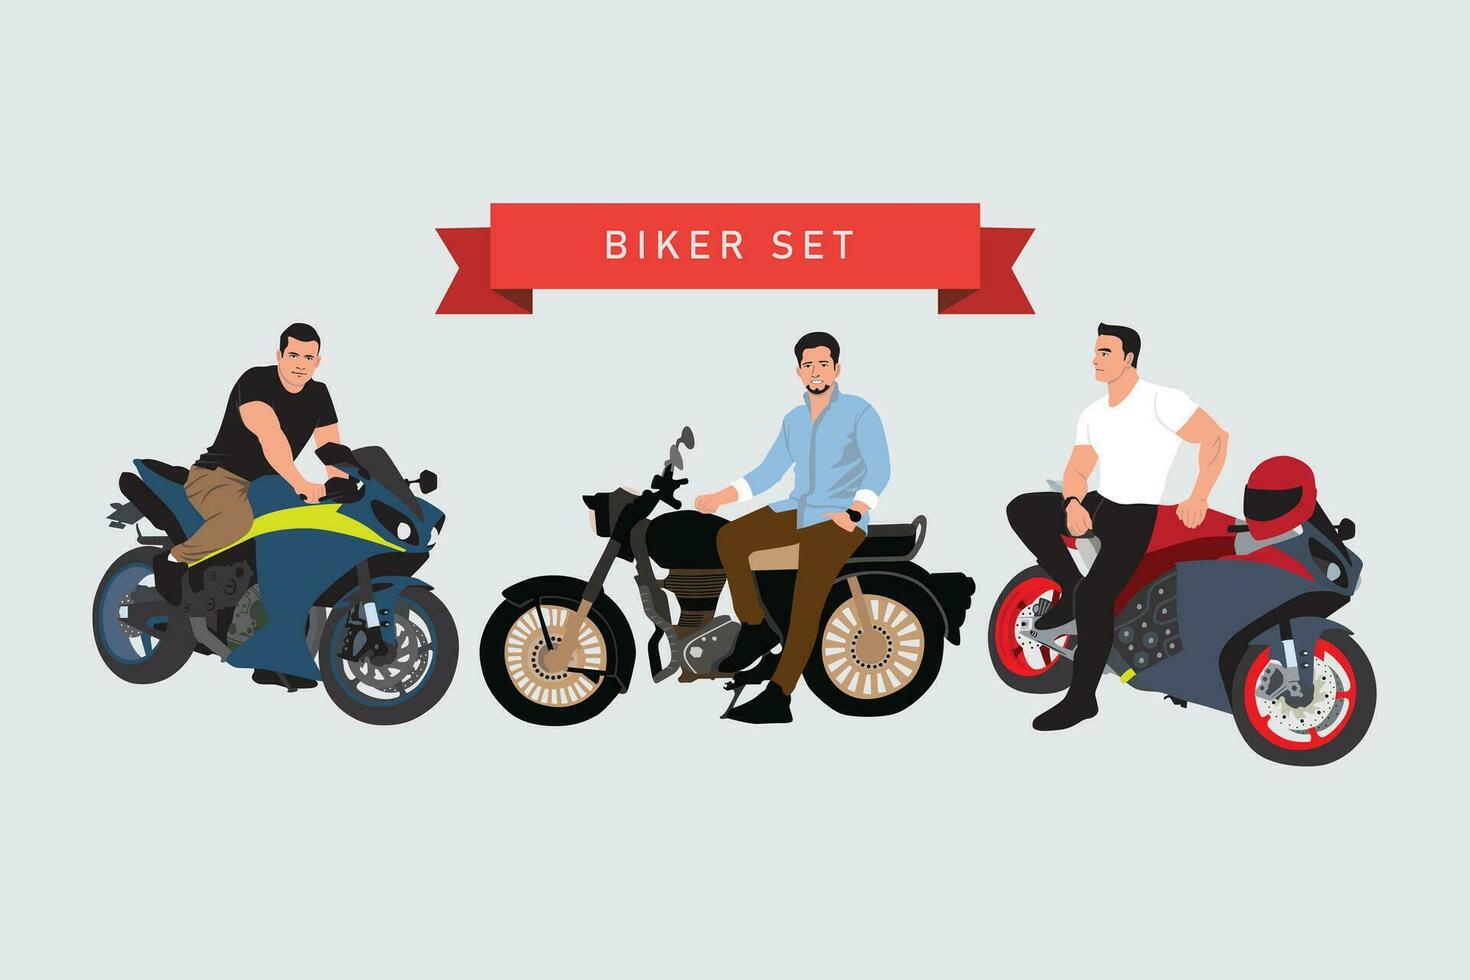 Bikers on motorcycles. Vector illustration in flat style. Motorcyclists on motorbike.